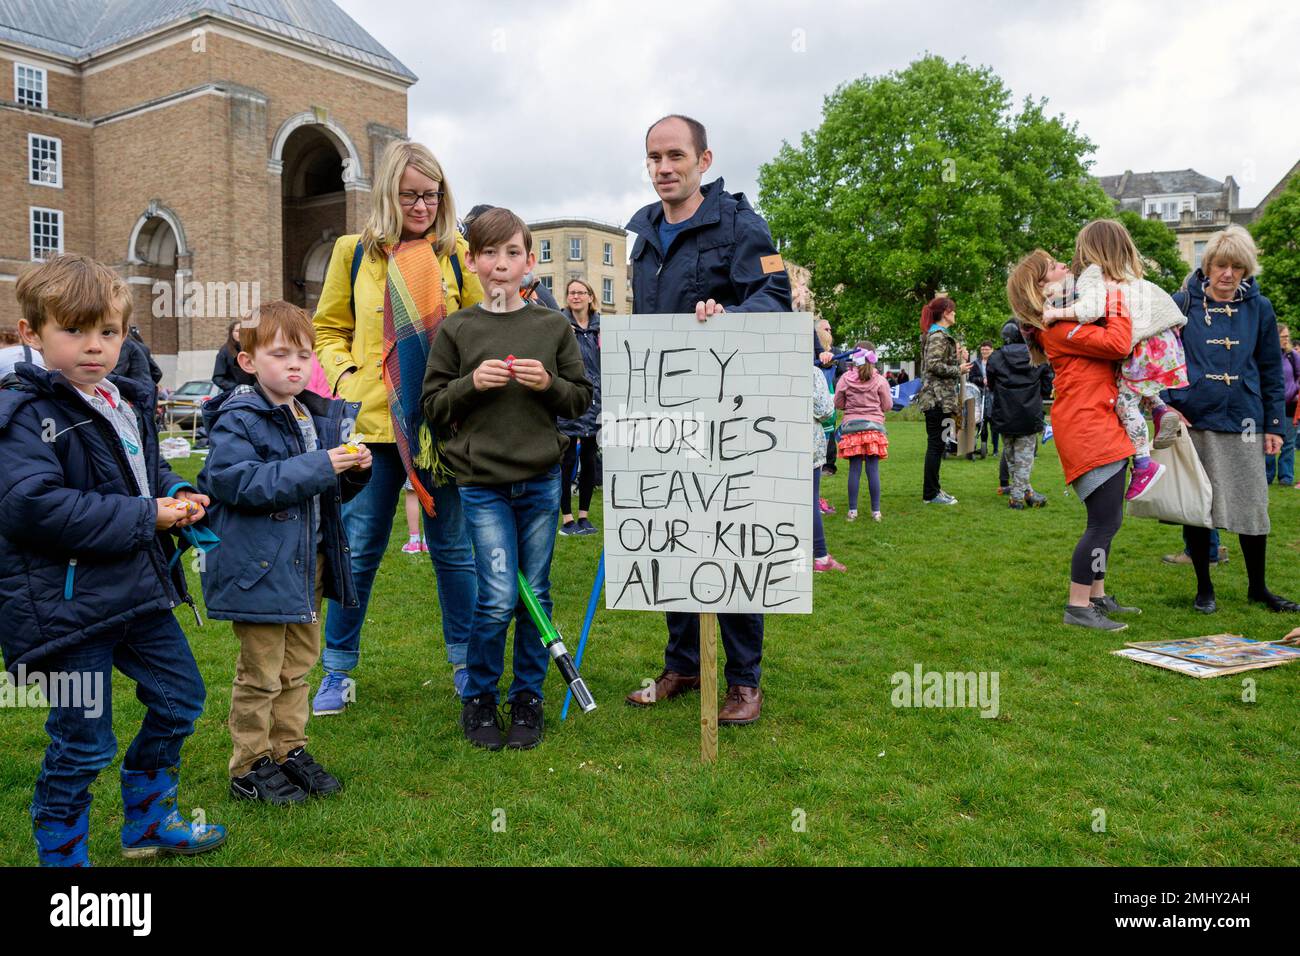 Bristol,UK. 20th May, 2017. Protesters carrying signs and placards are pictured as they prepare to march through the streets of Bristol to protest abo Stock Photo